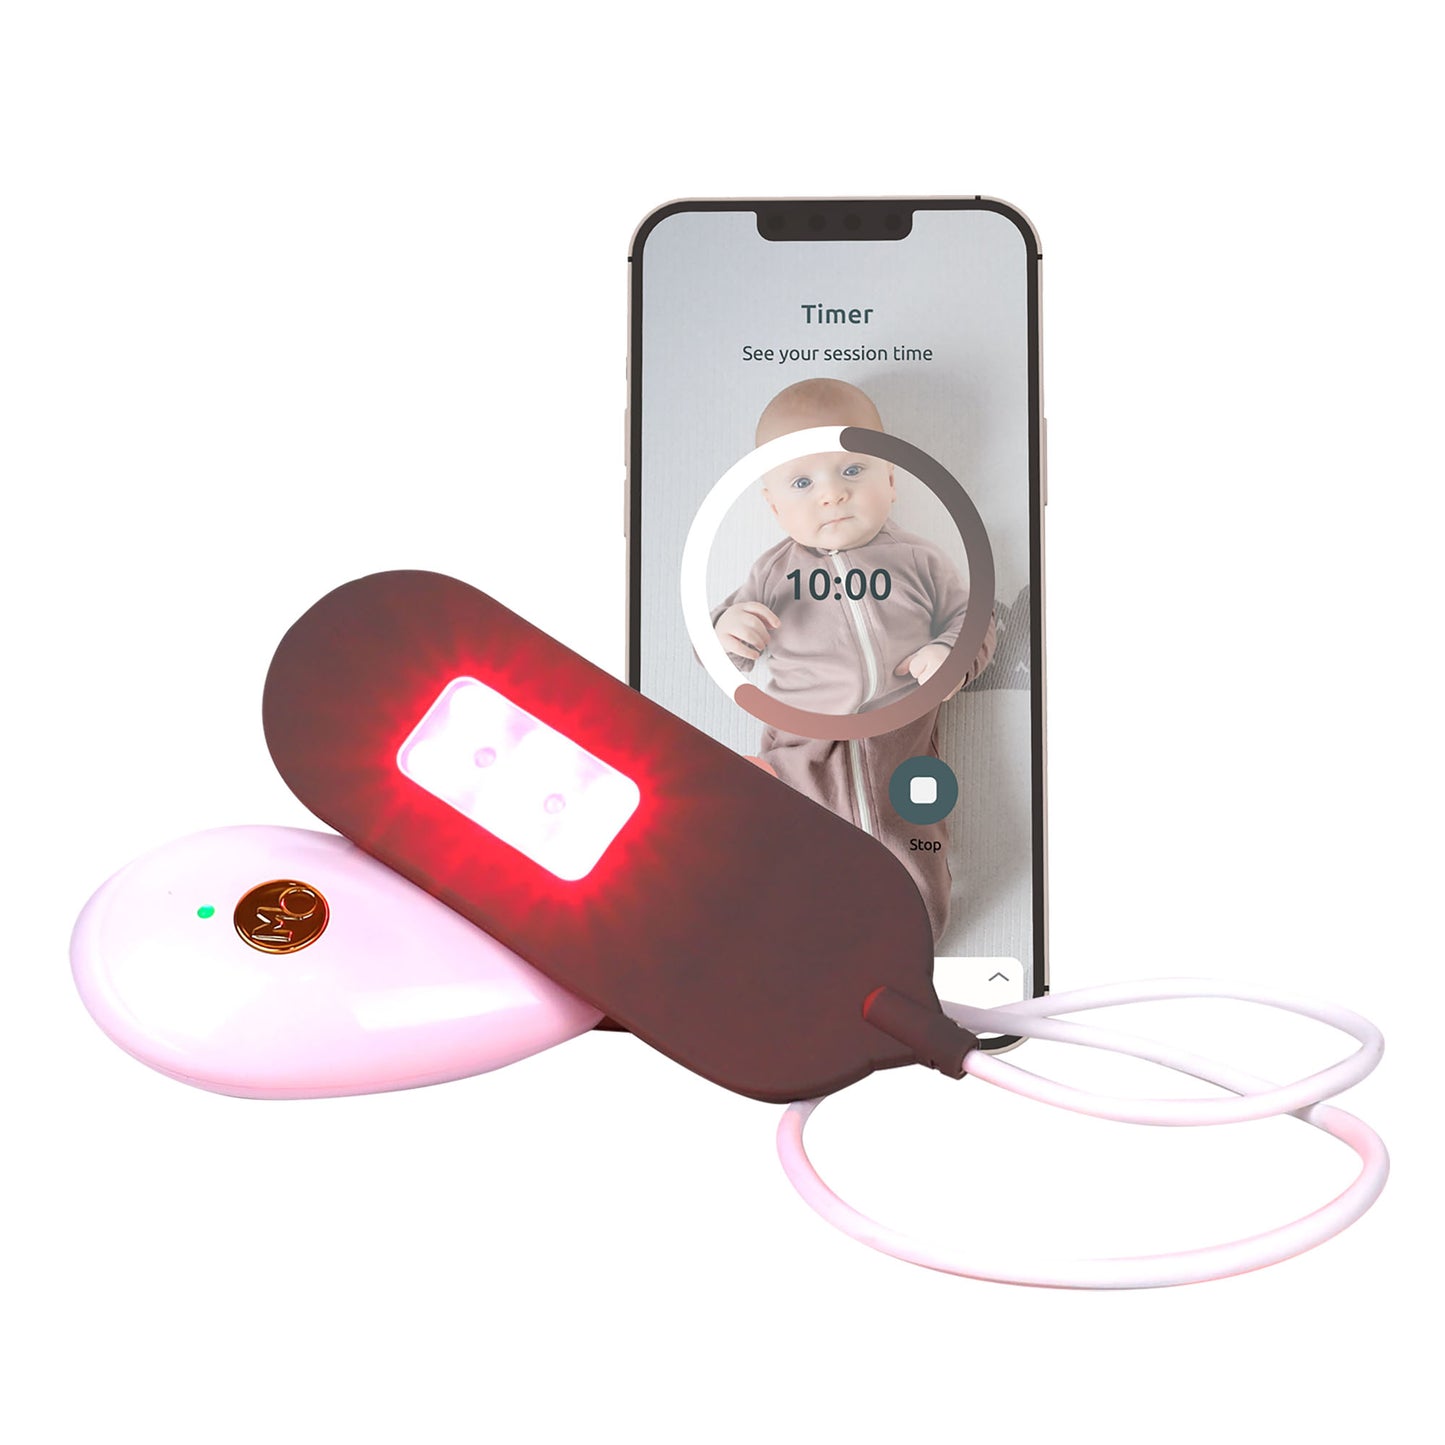 NeoHeat Perineal Healing Device with NeoBrief